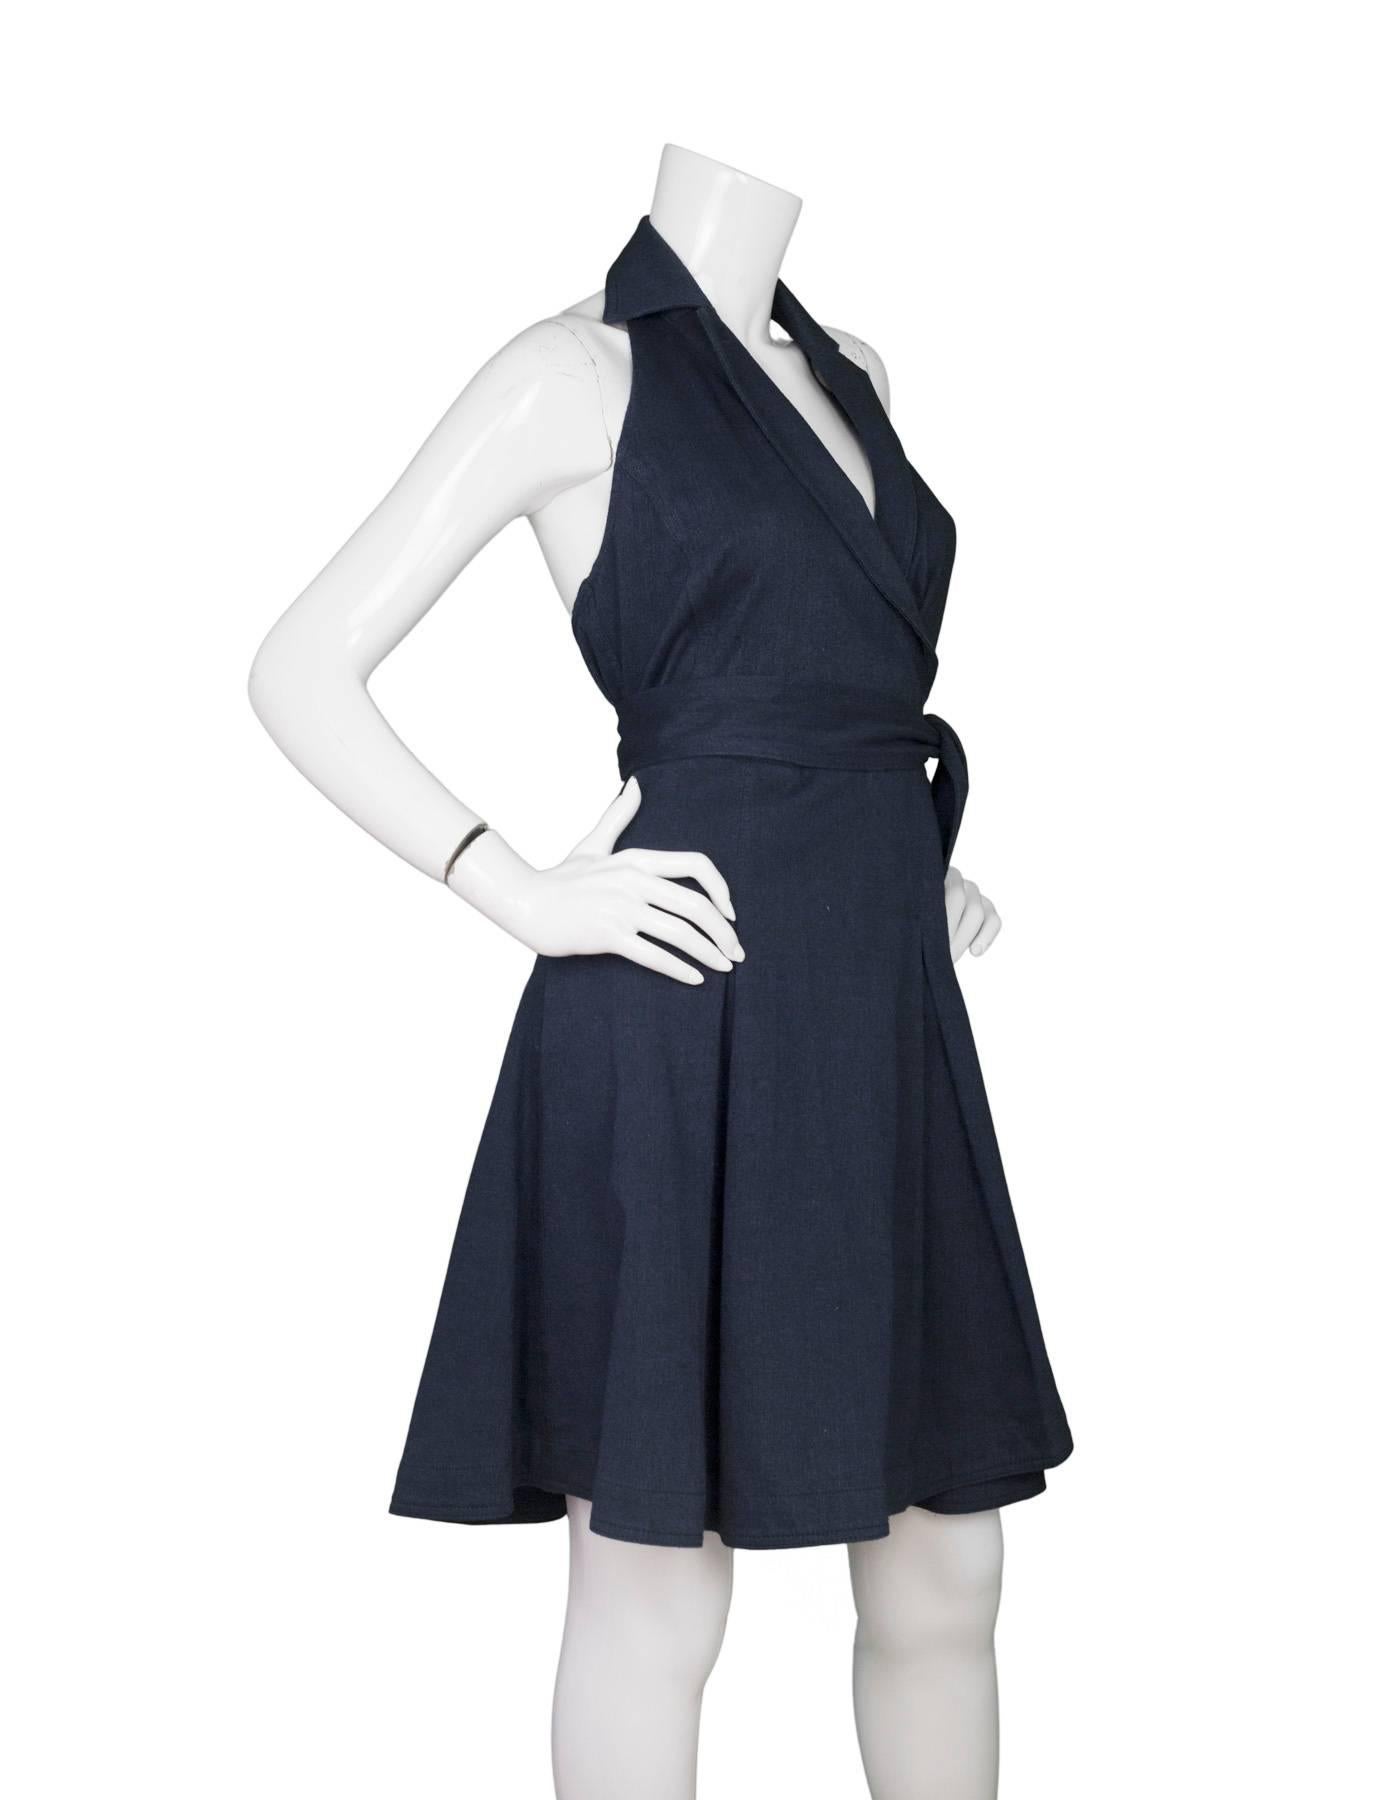 DVF NEW Blue Denim Halter Wrap Dress 

Made In: China
Color: Indigo blue
Composition: 93% cotton, 7% elastane
Lining: None
Closure/Opening: Wrap style closure
Exterior Pockets: Two pockets
Interior Pockets: None
Retail Price: $450 + tax
Overall